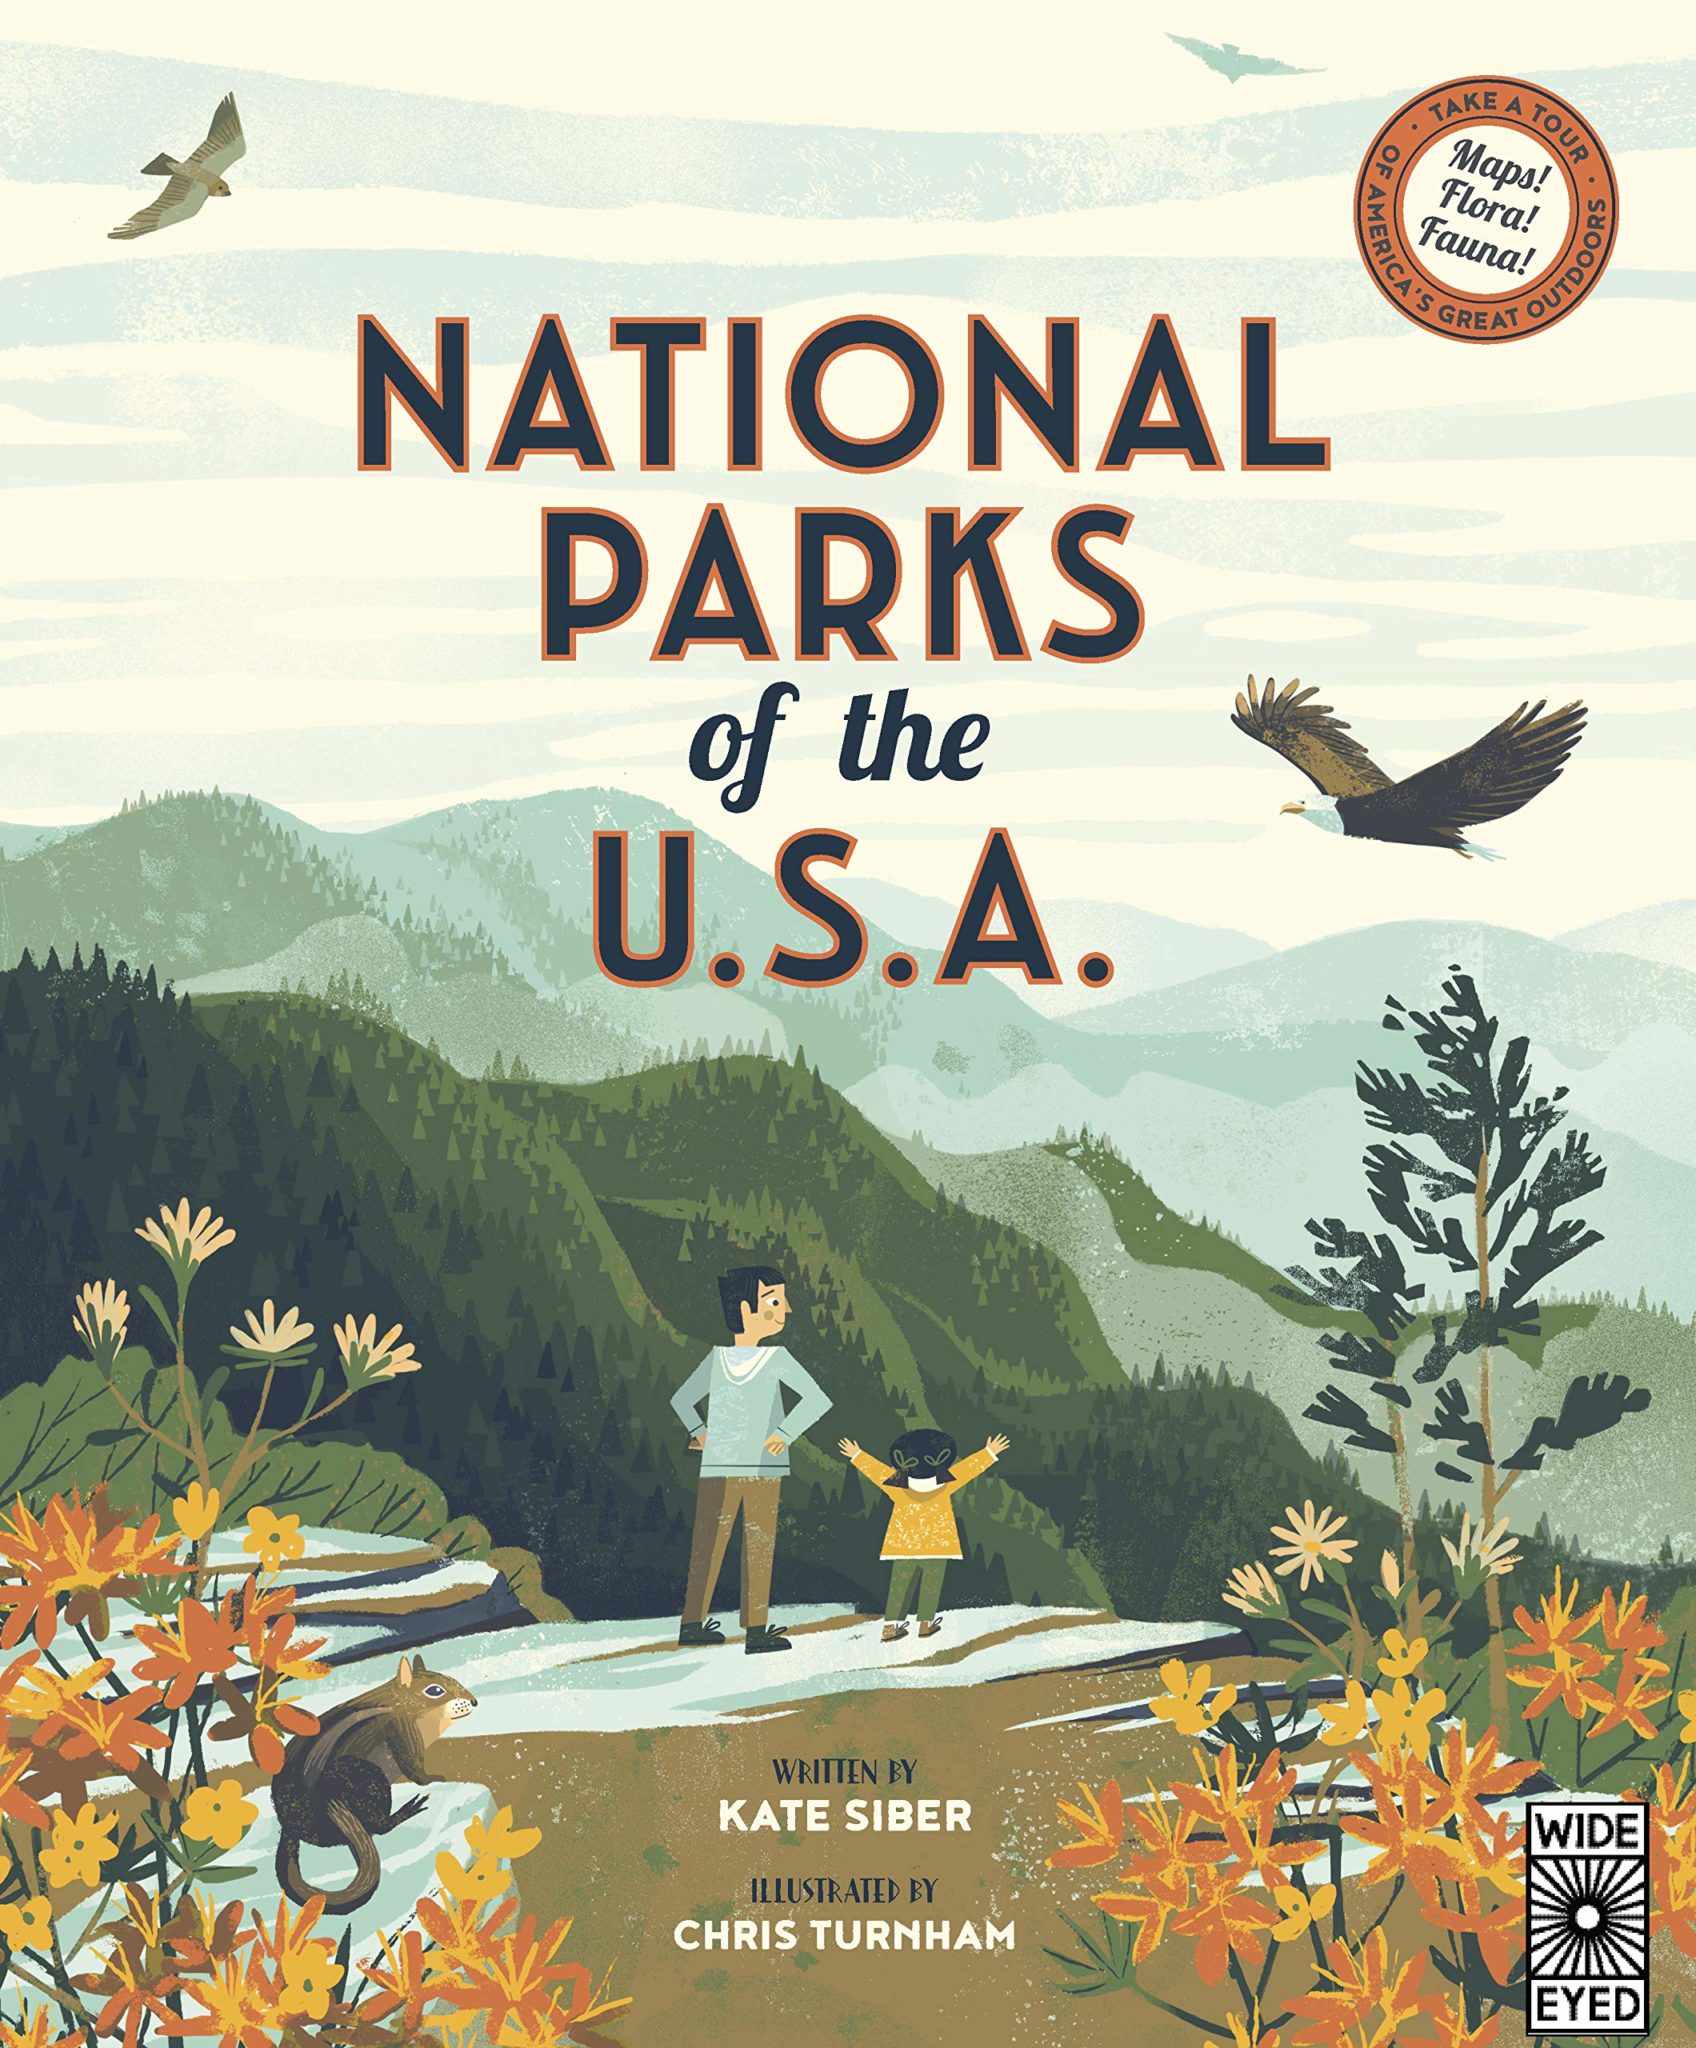 "National Parks of the U.S.A. by Kate Siber